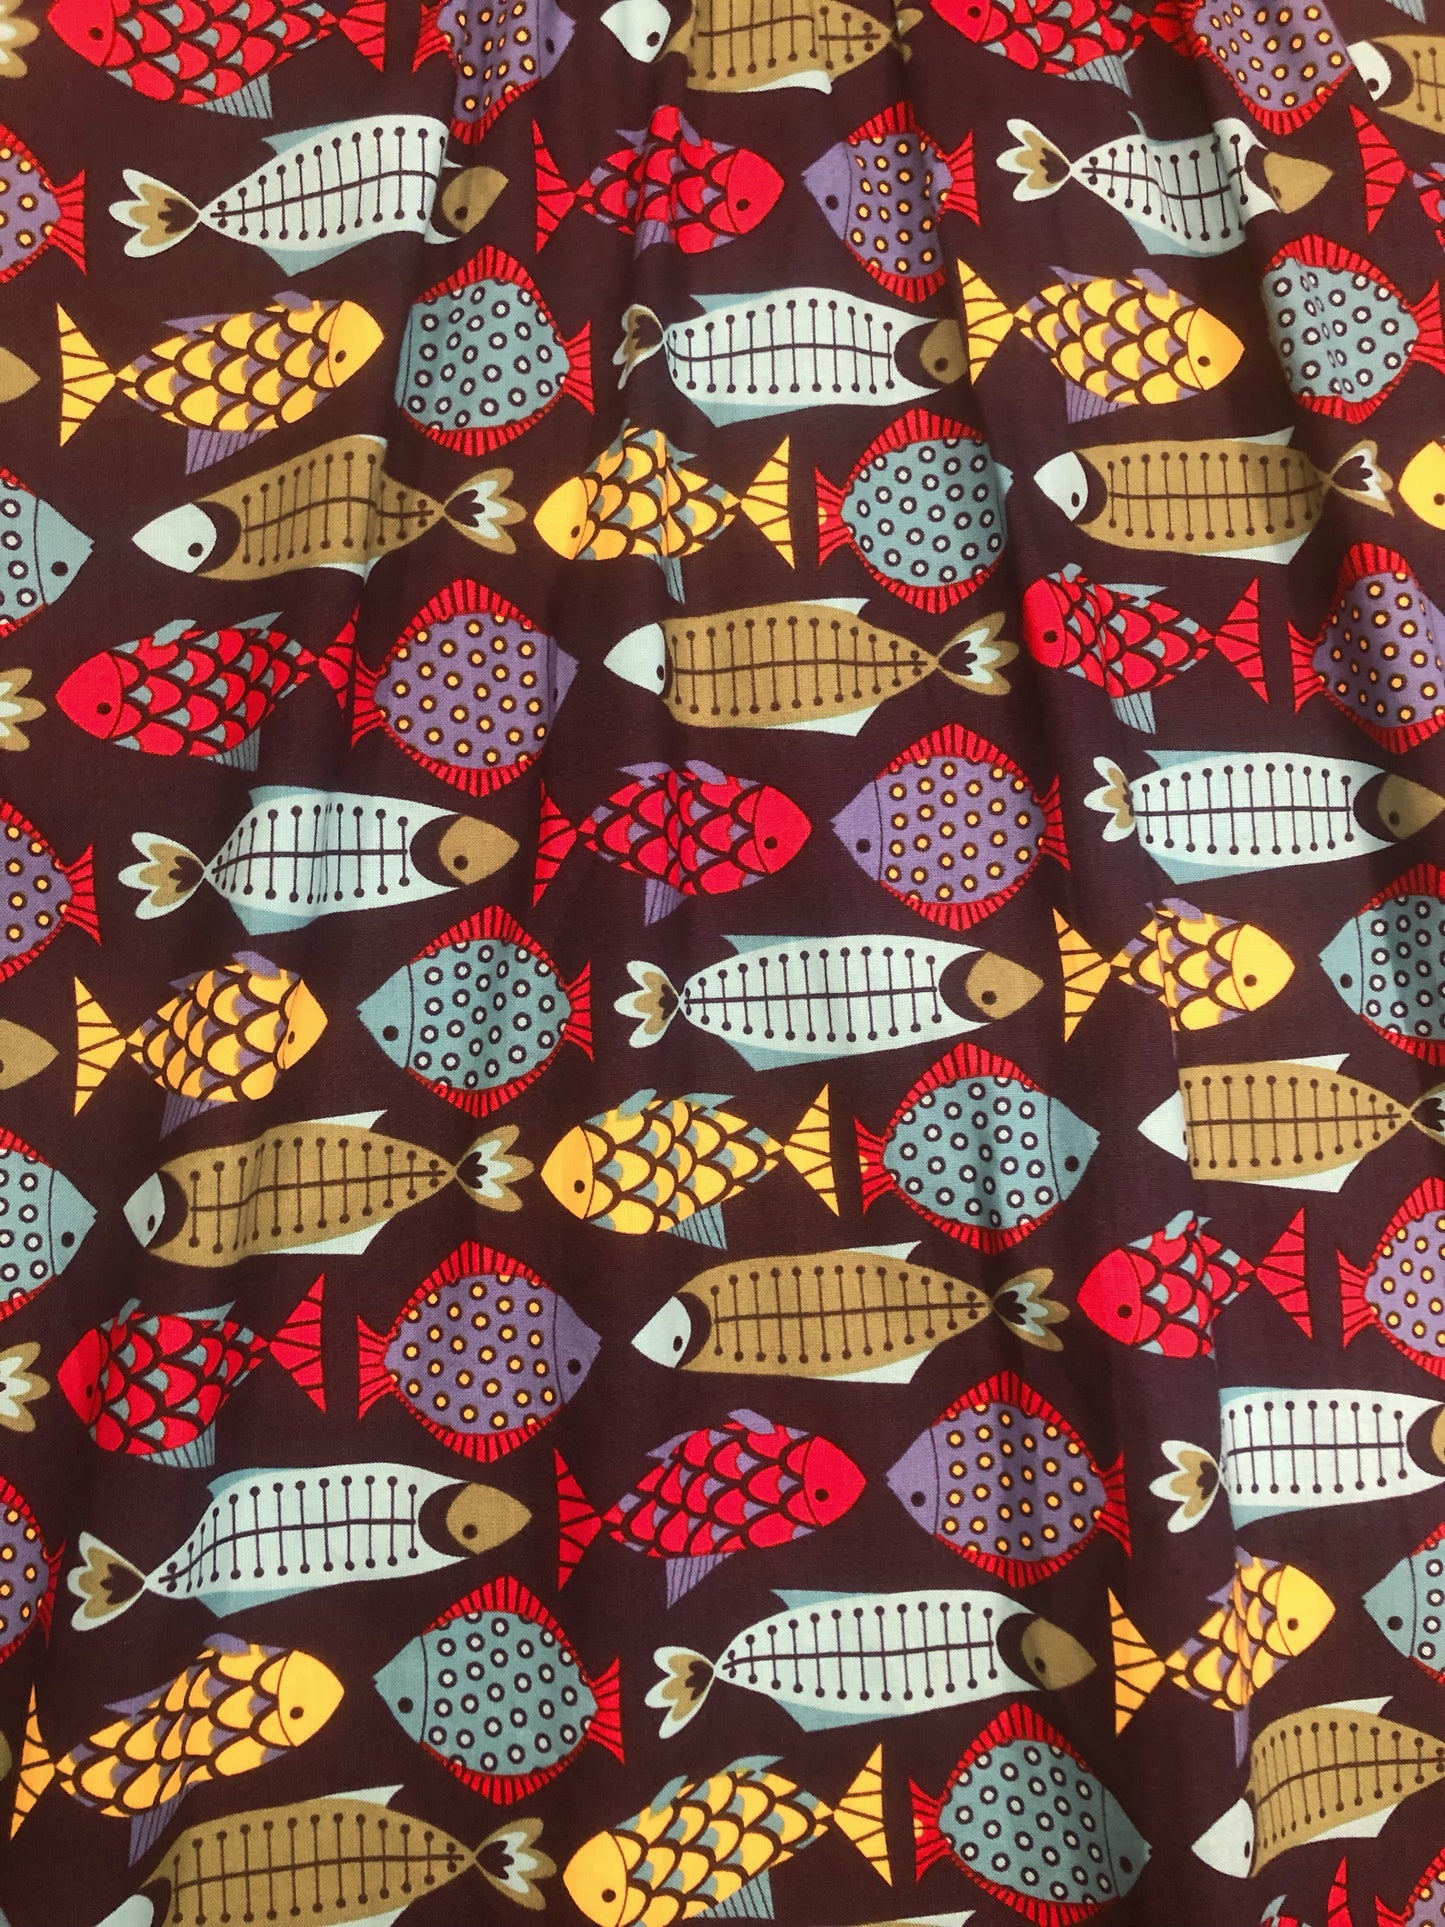 colofrul fish with different patterned designs 